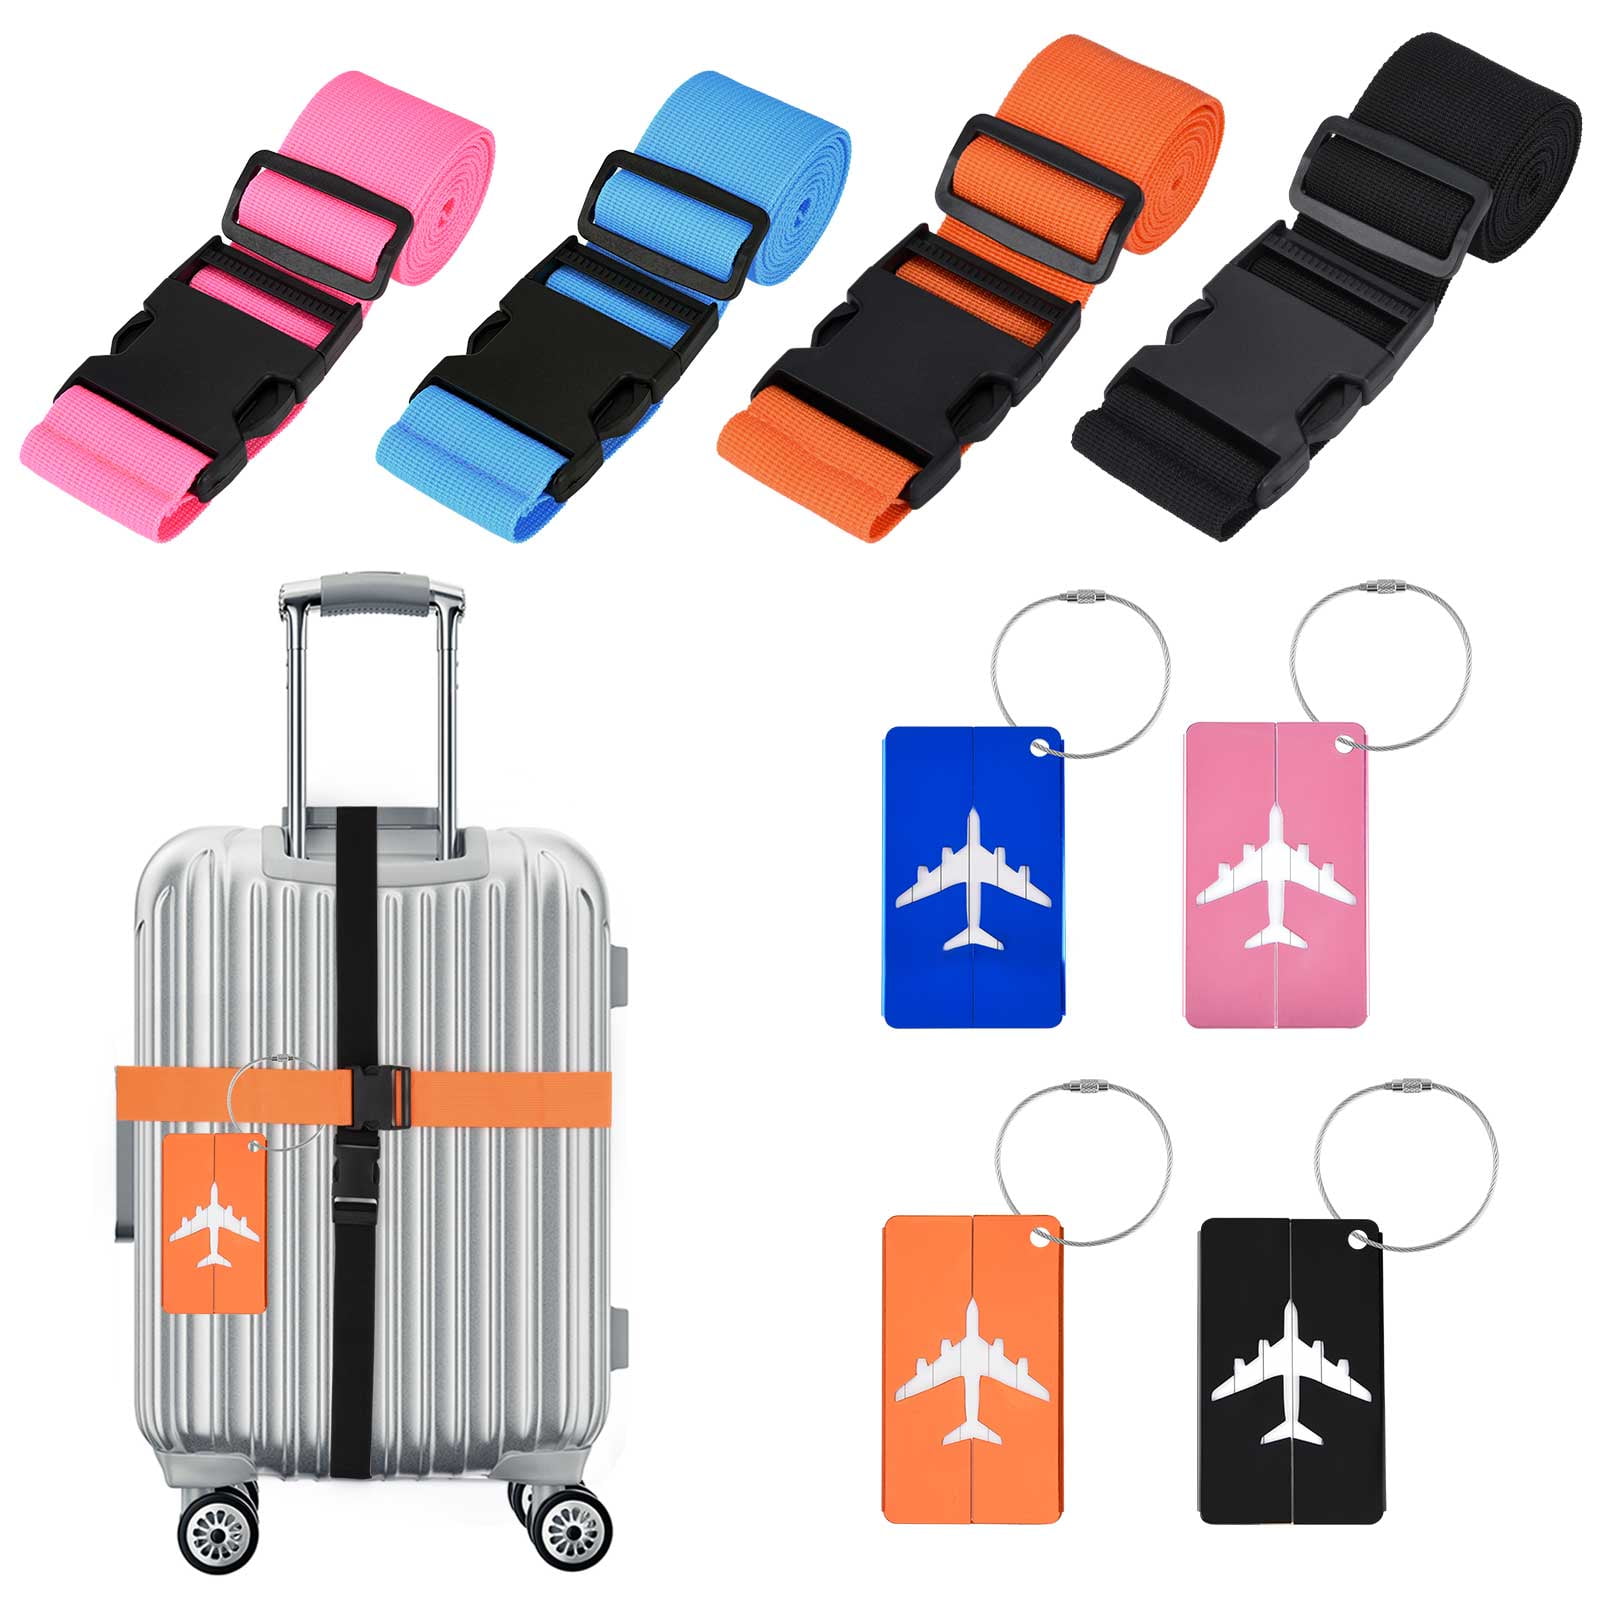 Taihexin 8 Pack Luggage Straps Suitcase Tags Set, Travel Adjustable ...